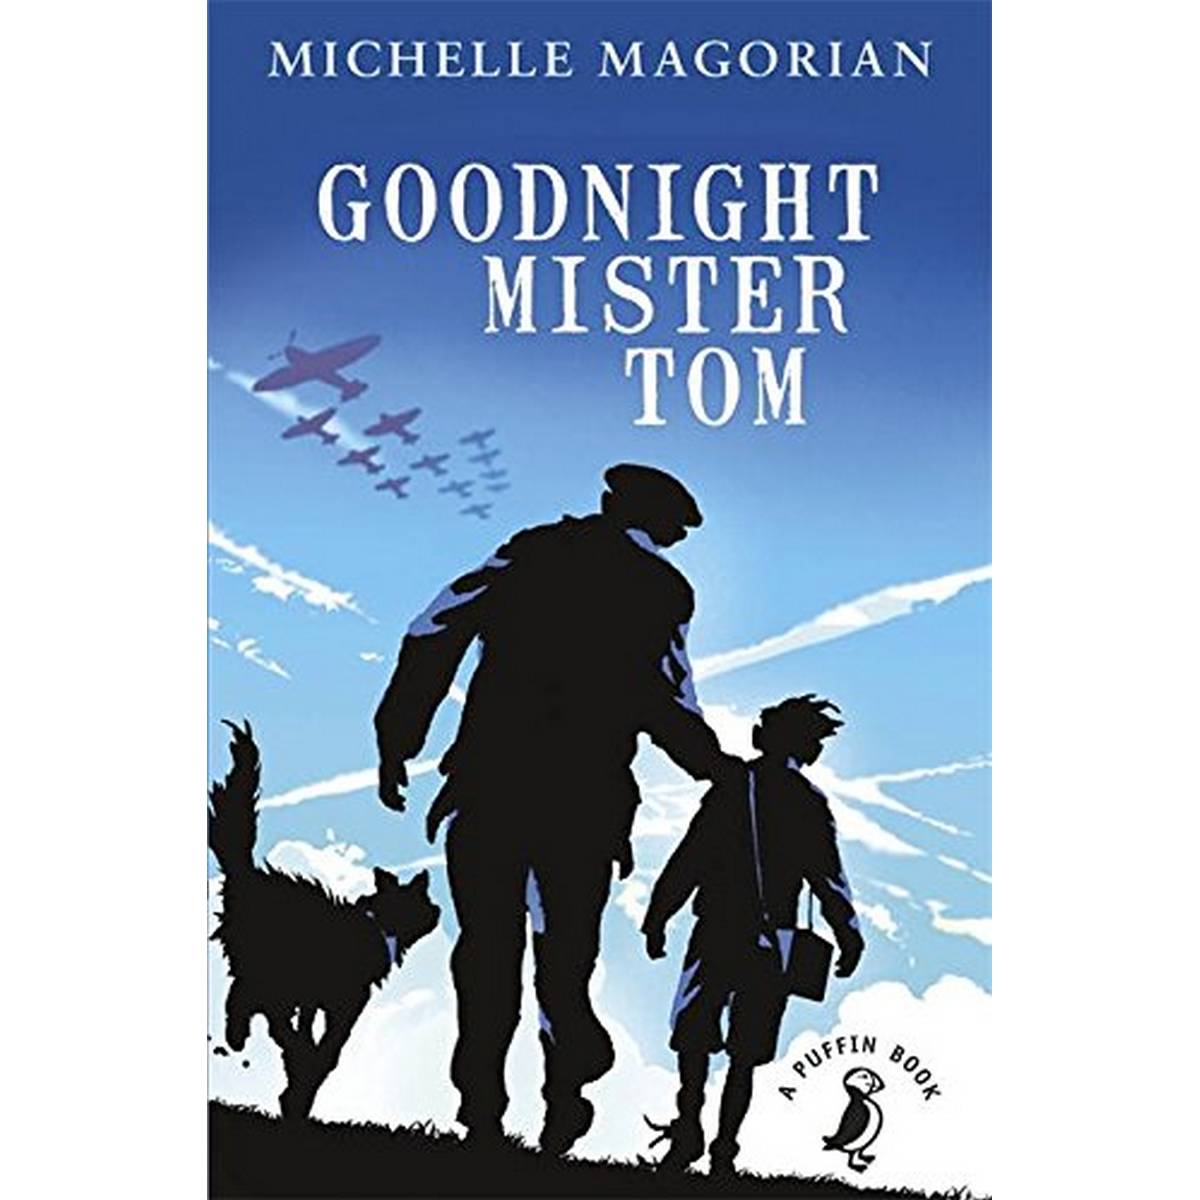 Goodnight Mister Tom (A Puffin Book)